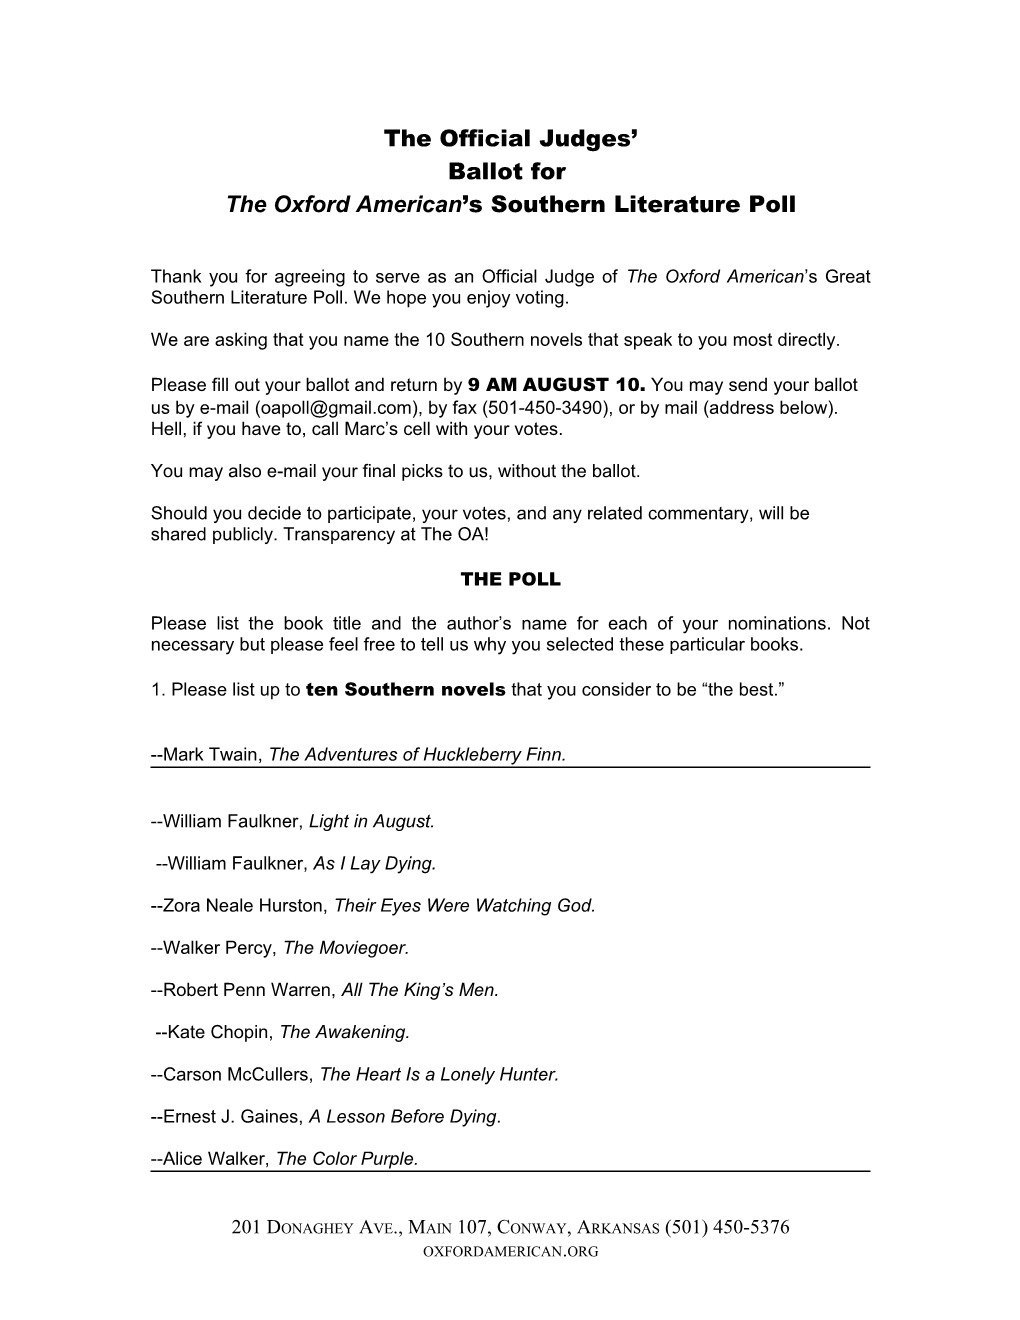 Official Ballot for Judges of the Oxford American Southern Literature Poll